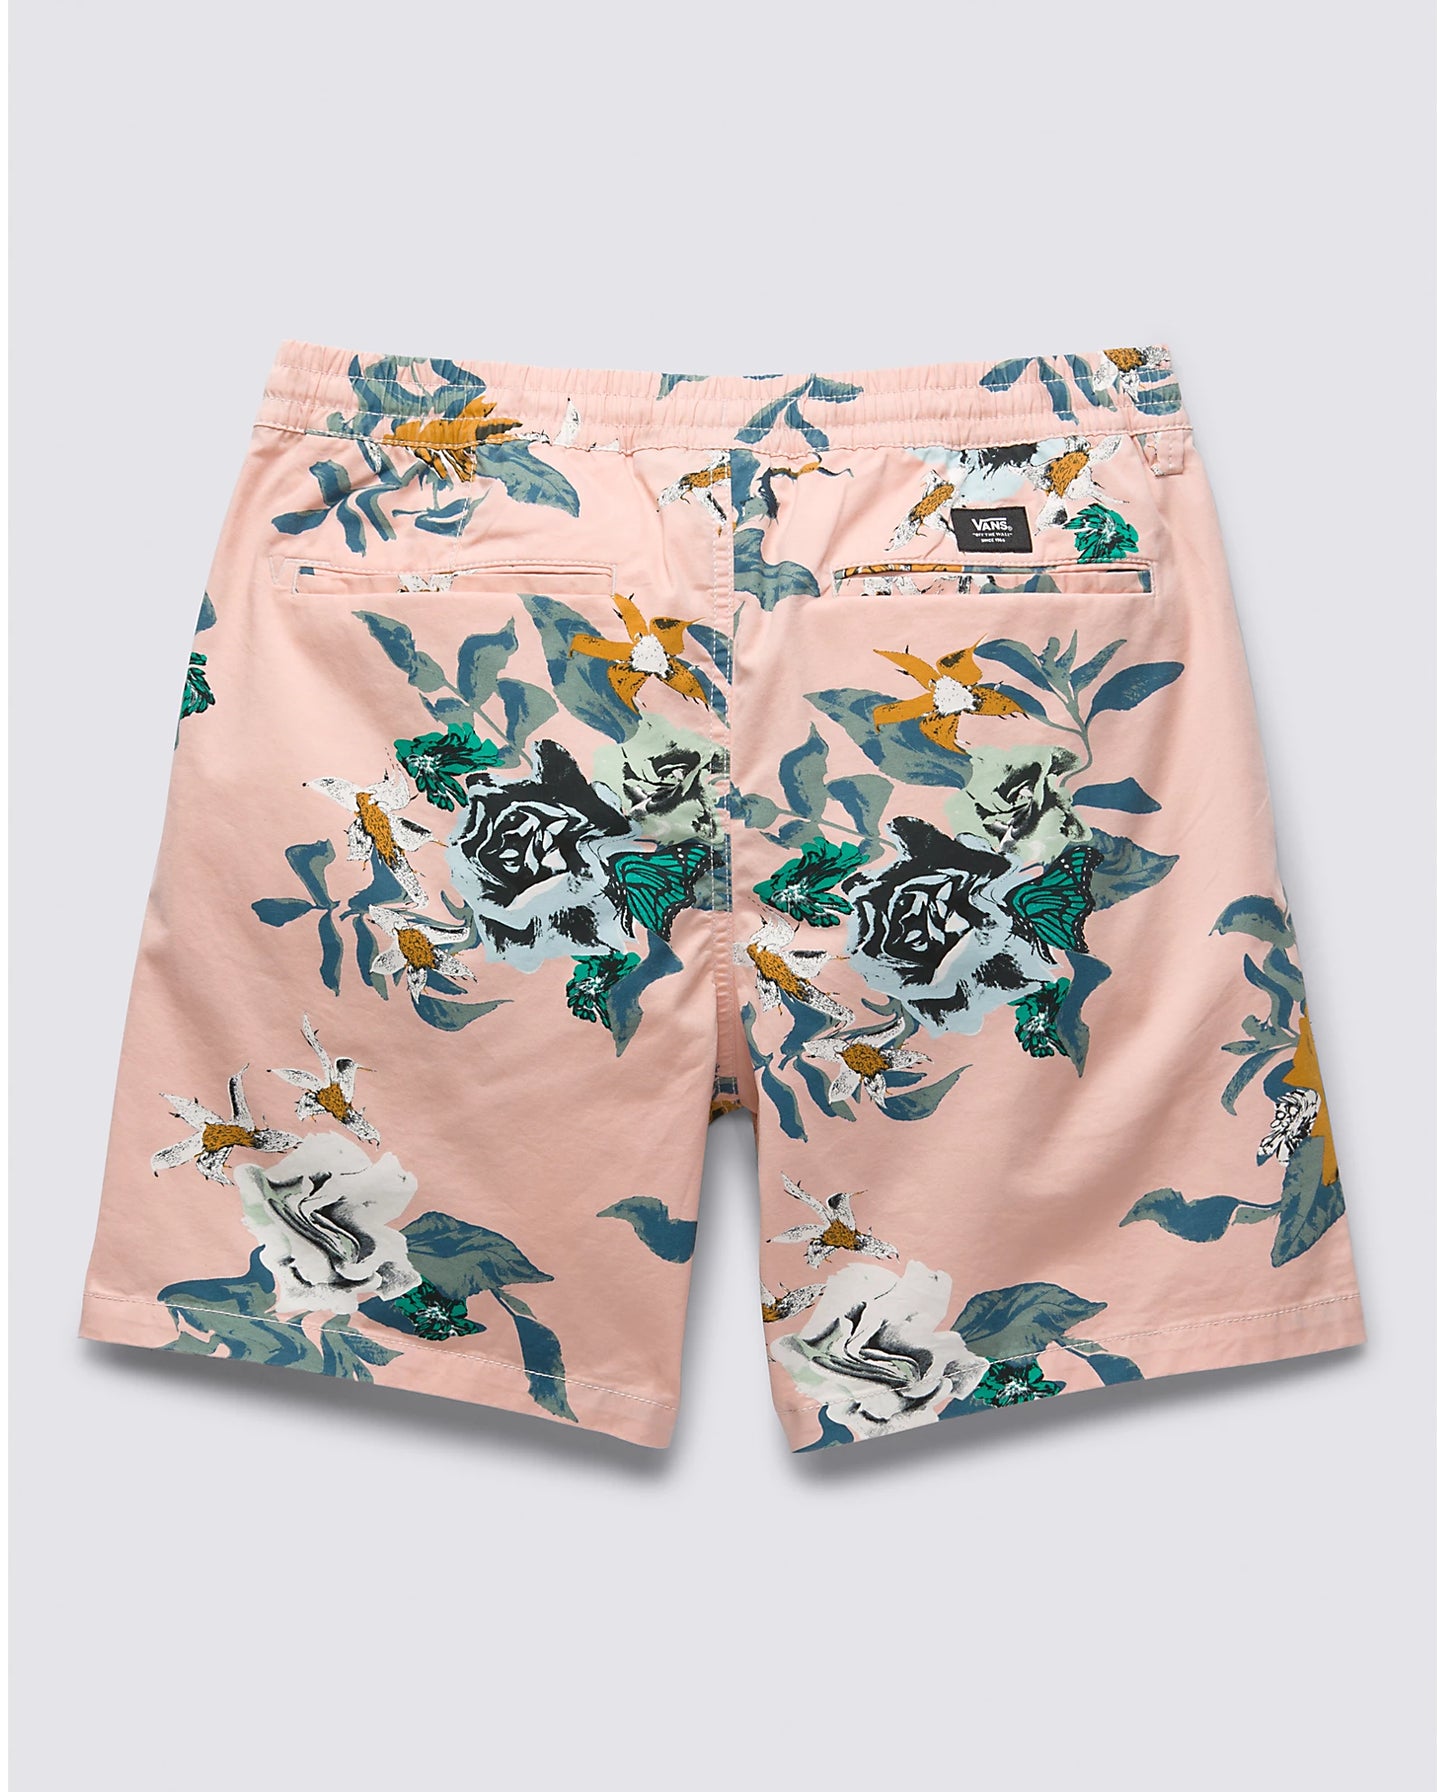 Range Relaxed Elastic 18" Shorts Rose Smok/Vans Teal(size options listed)